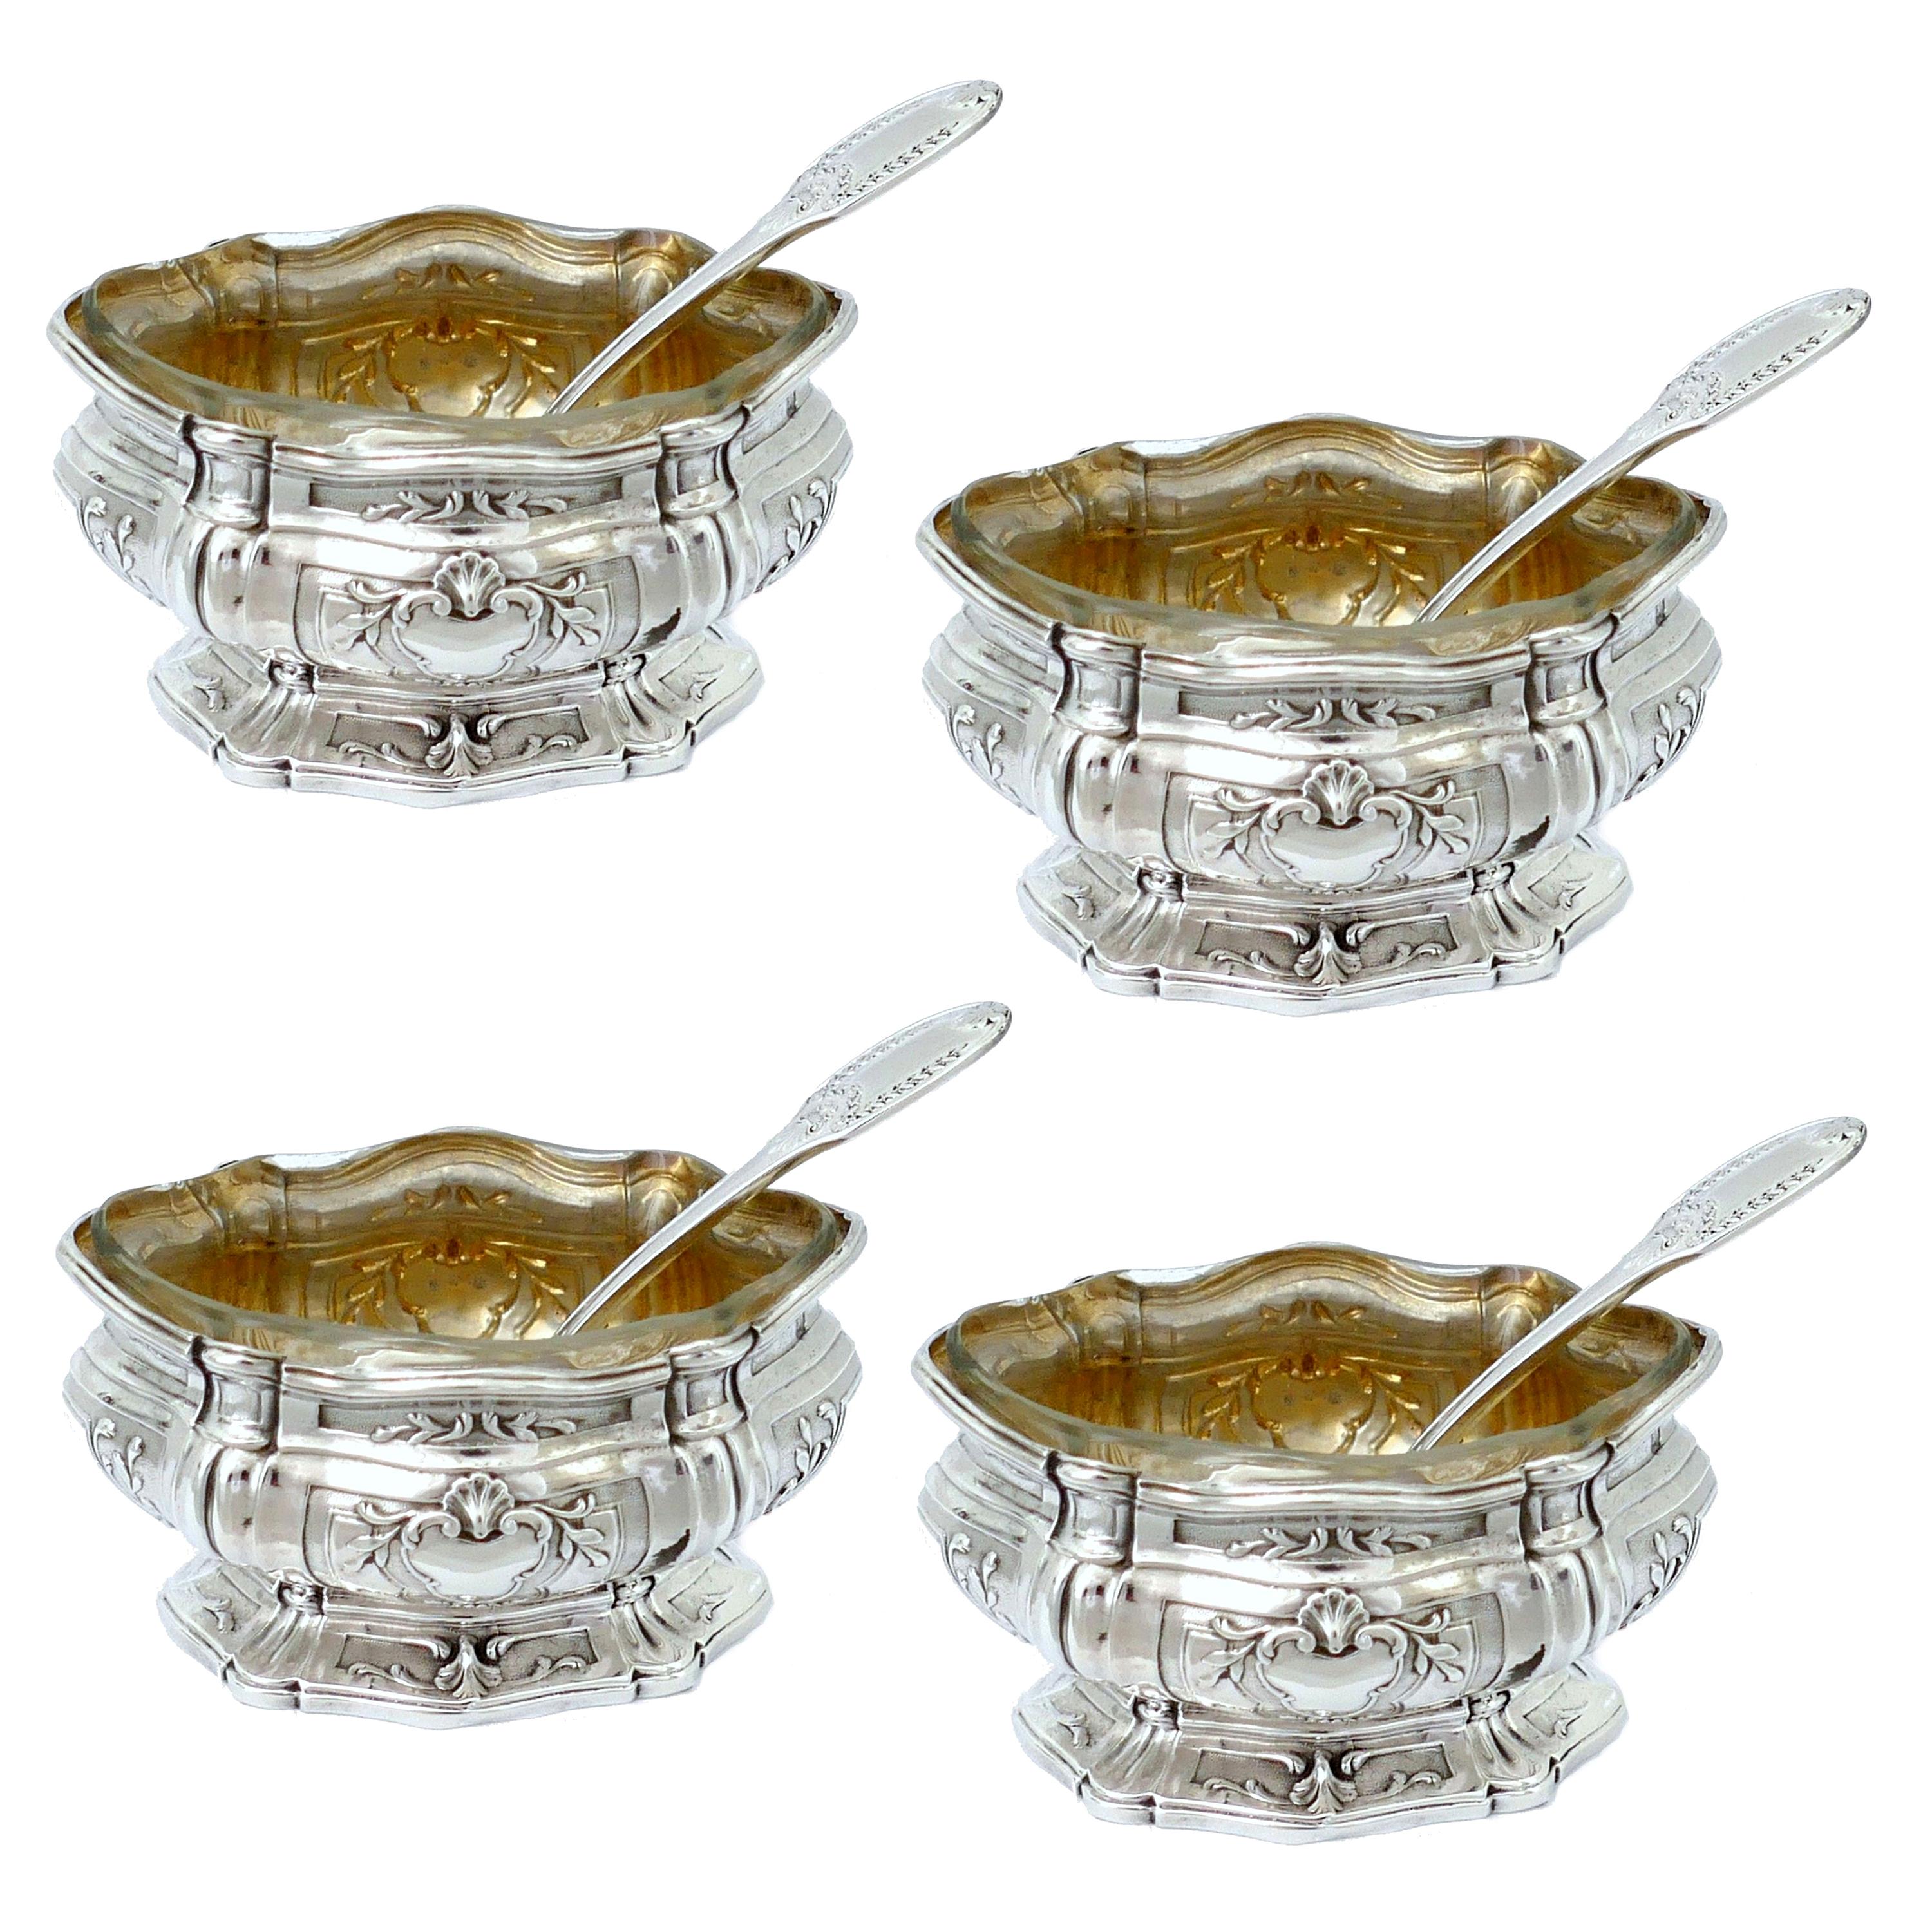 Puiforcat French Sterling Silver Set of Four Salt Cellars with Spoons